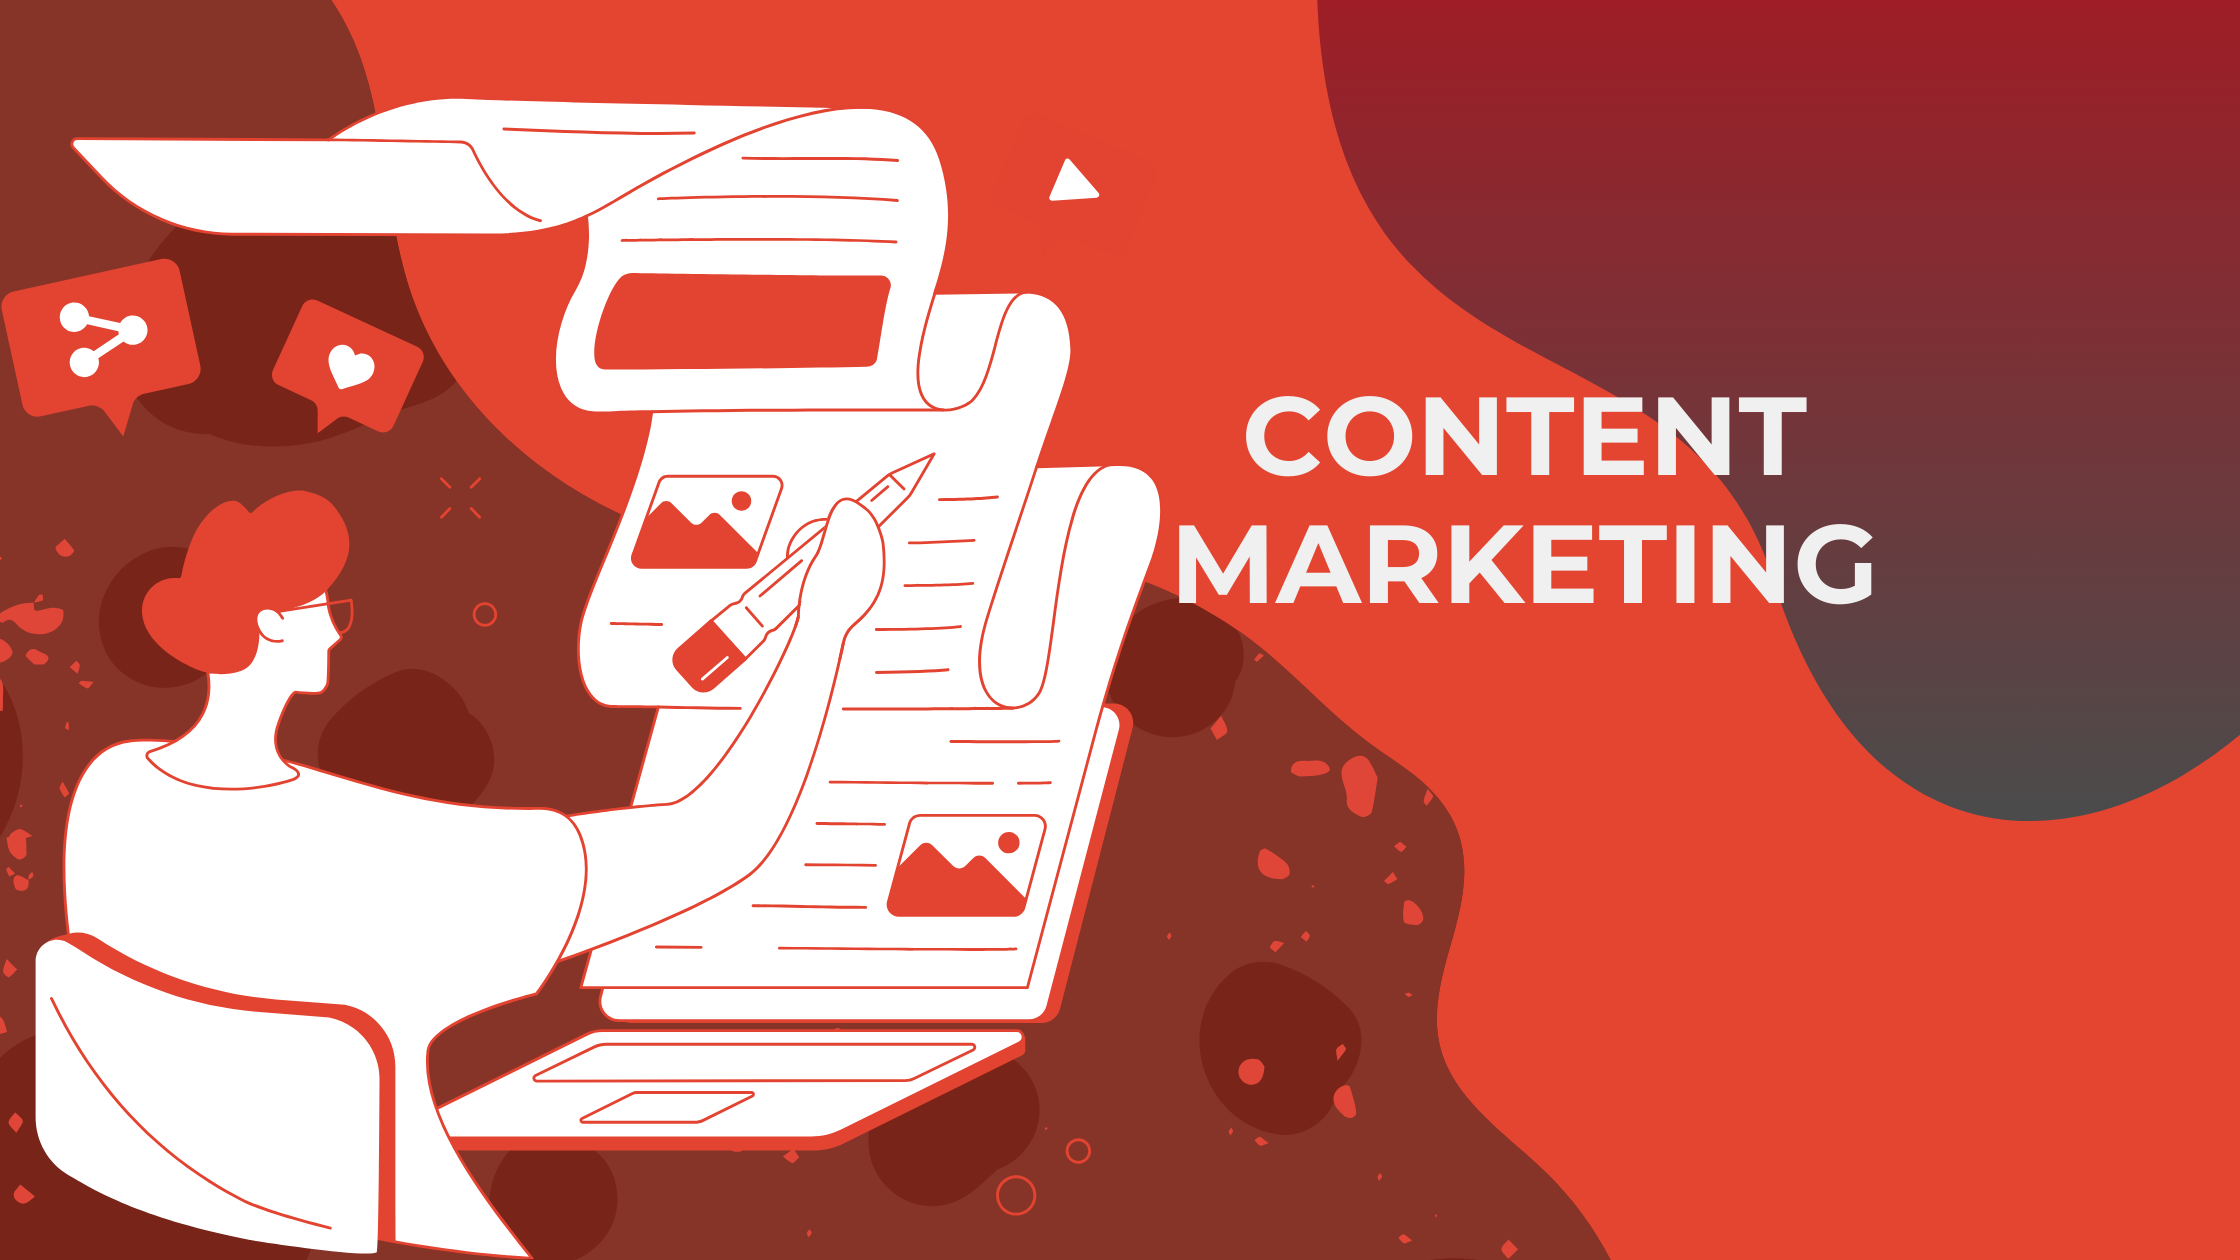 Content Marketing: How to Create a Content Strategy to Reach Your Target Audience?